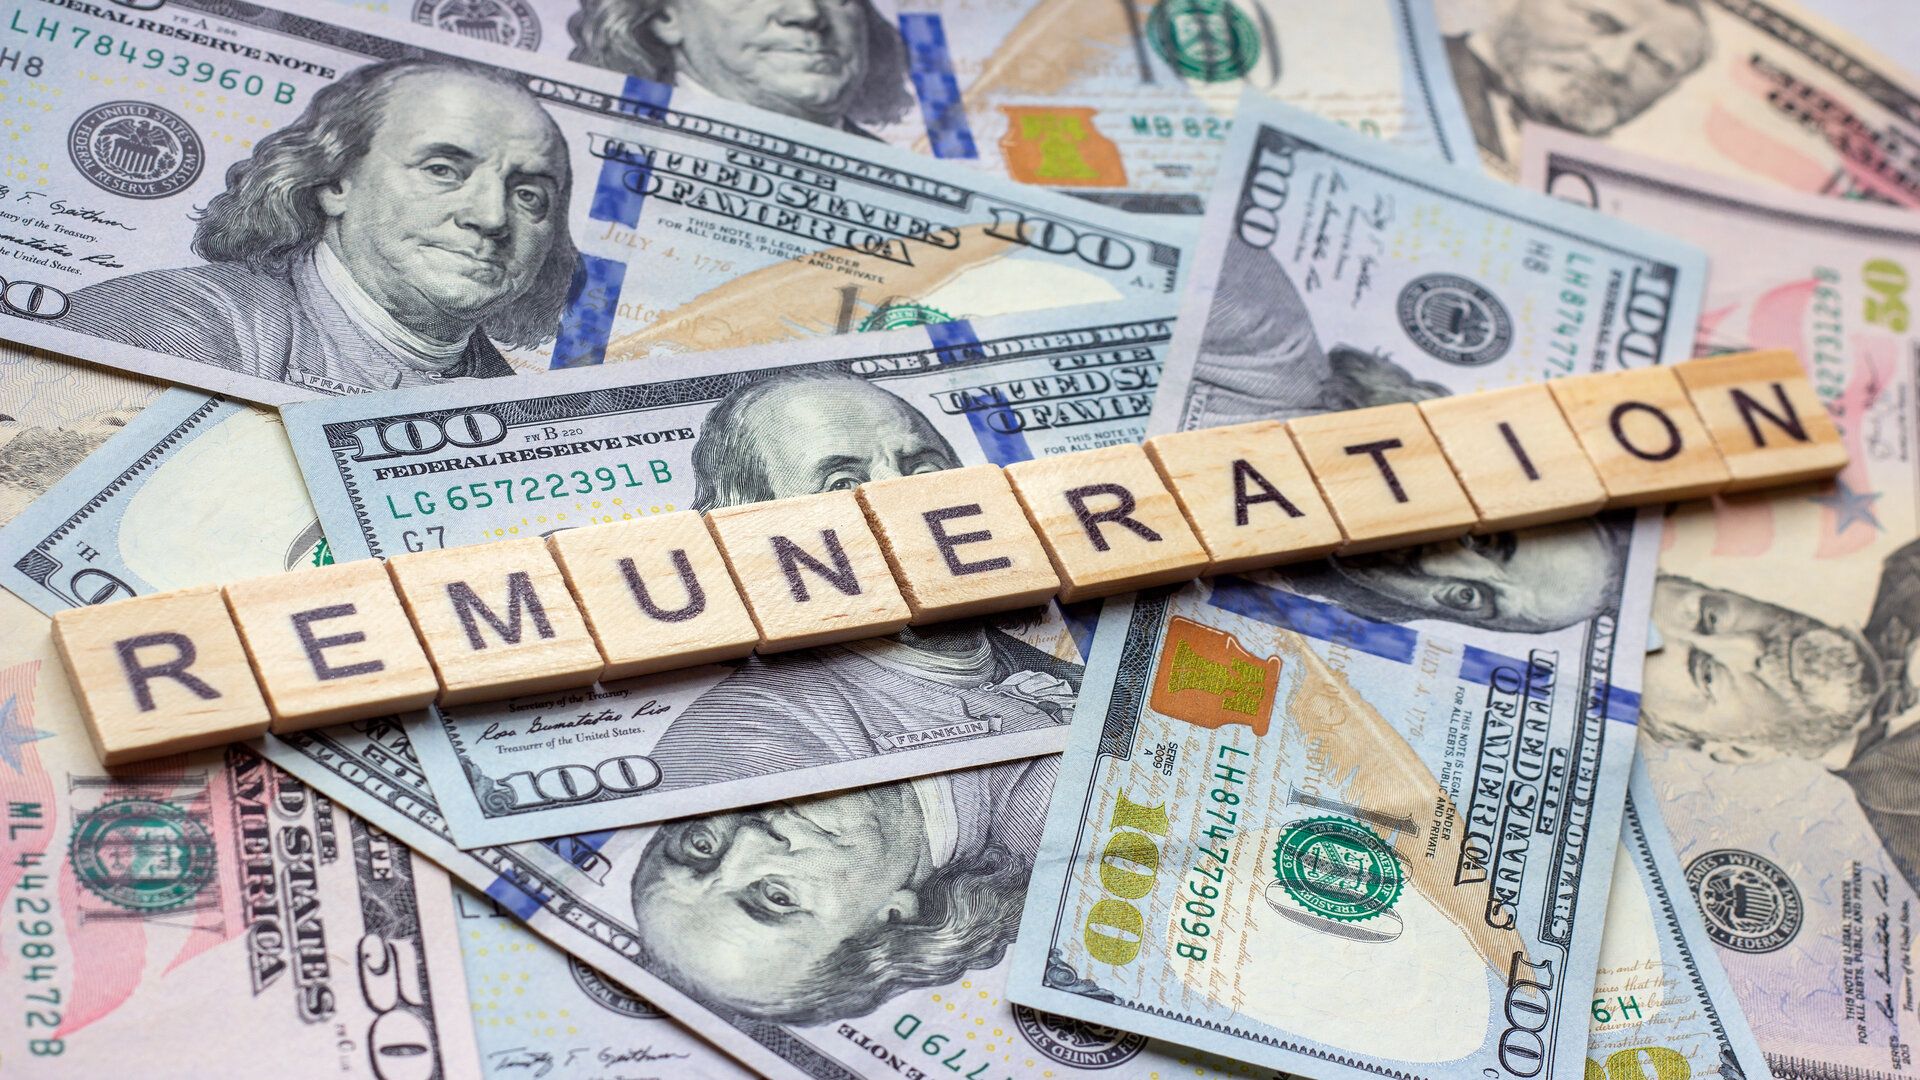 What Is Remuneration - Definition, Meaning, And Types